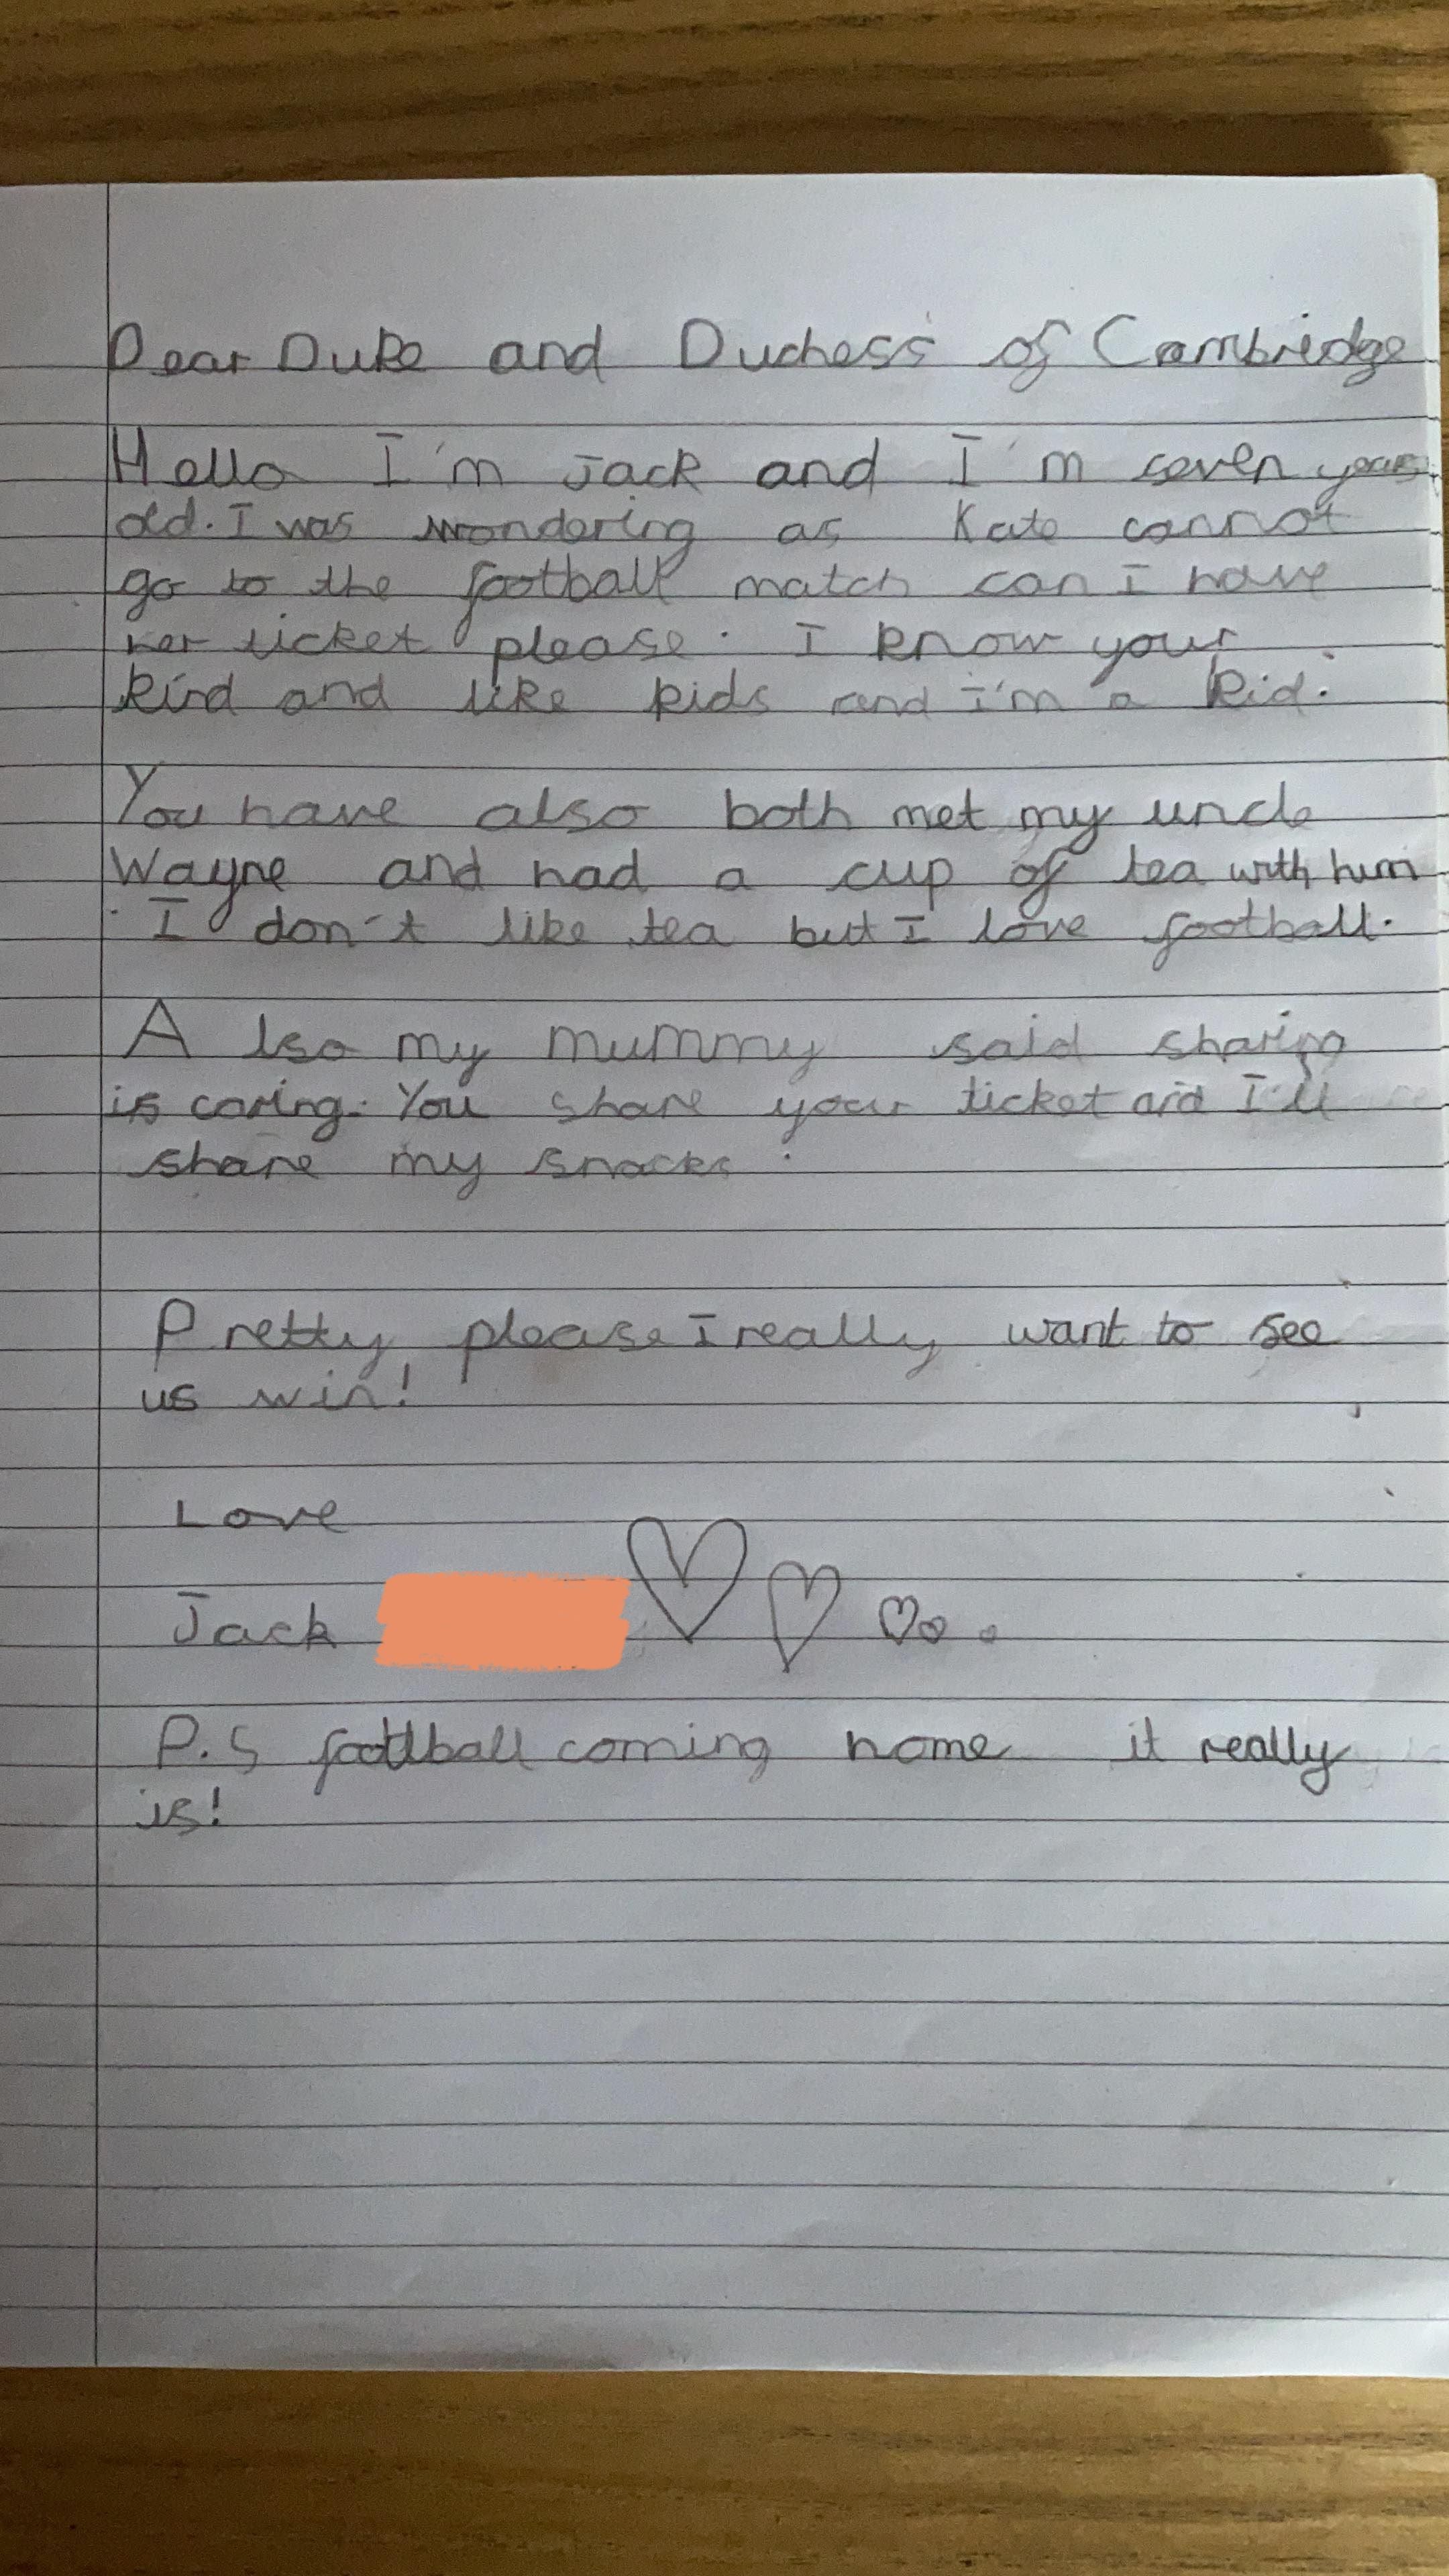 Seven-year-old Jack’s letter to the Duke and Duchess of Cambridge